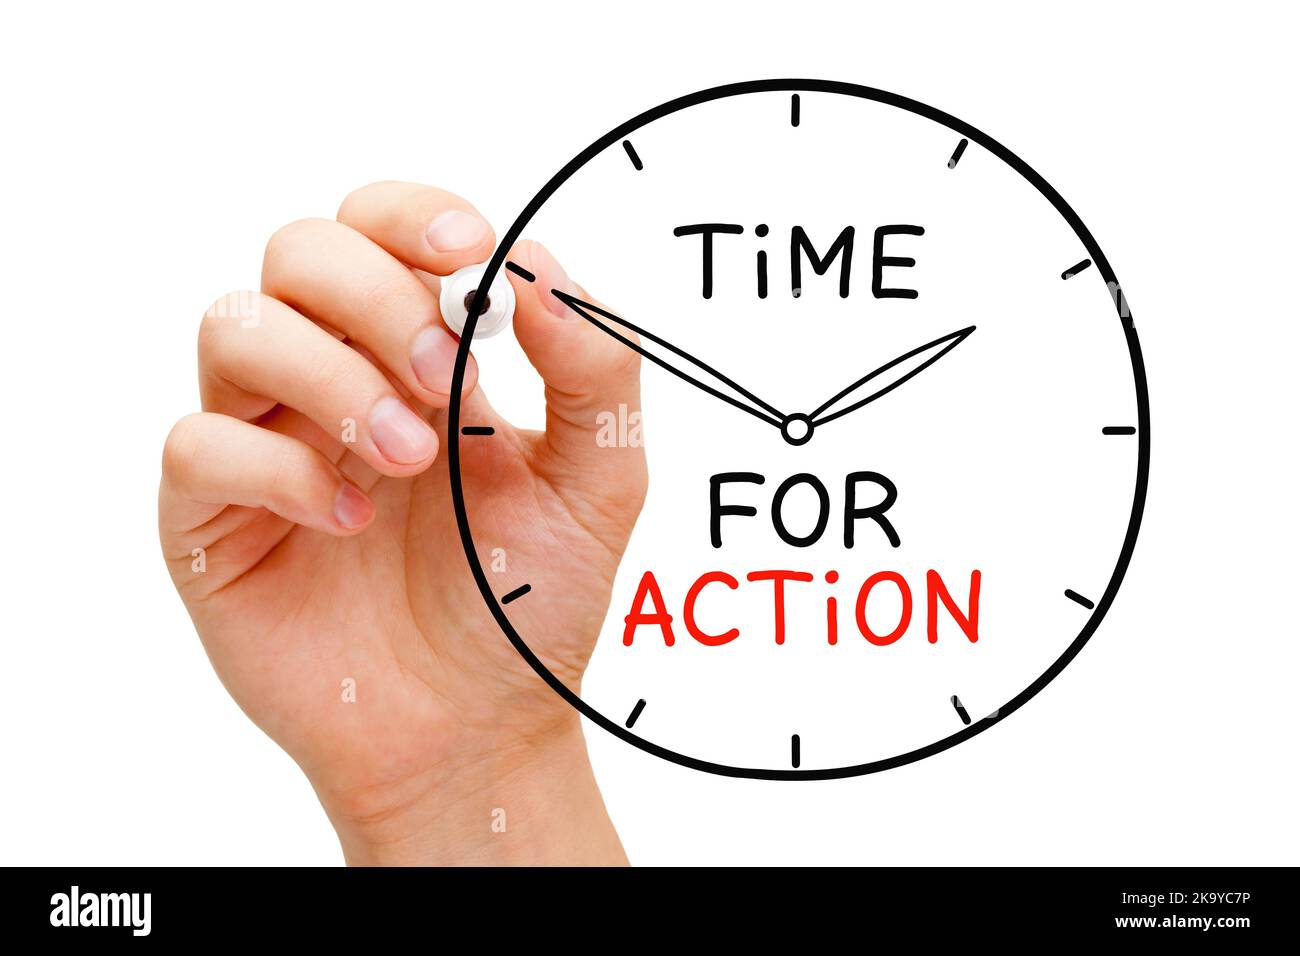 Hand drawing a clock with motivational message Time for Action written on it. Stock Photo